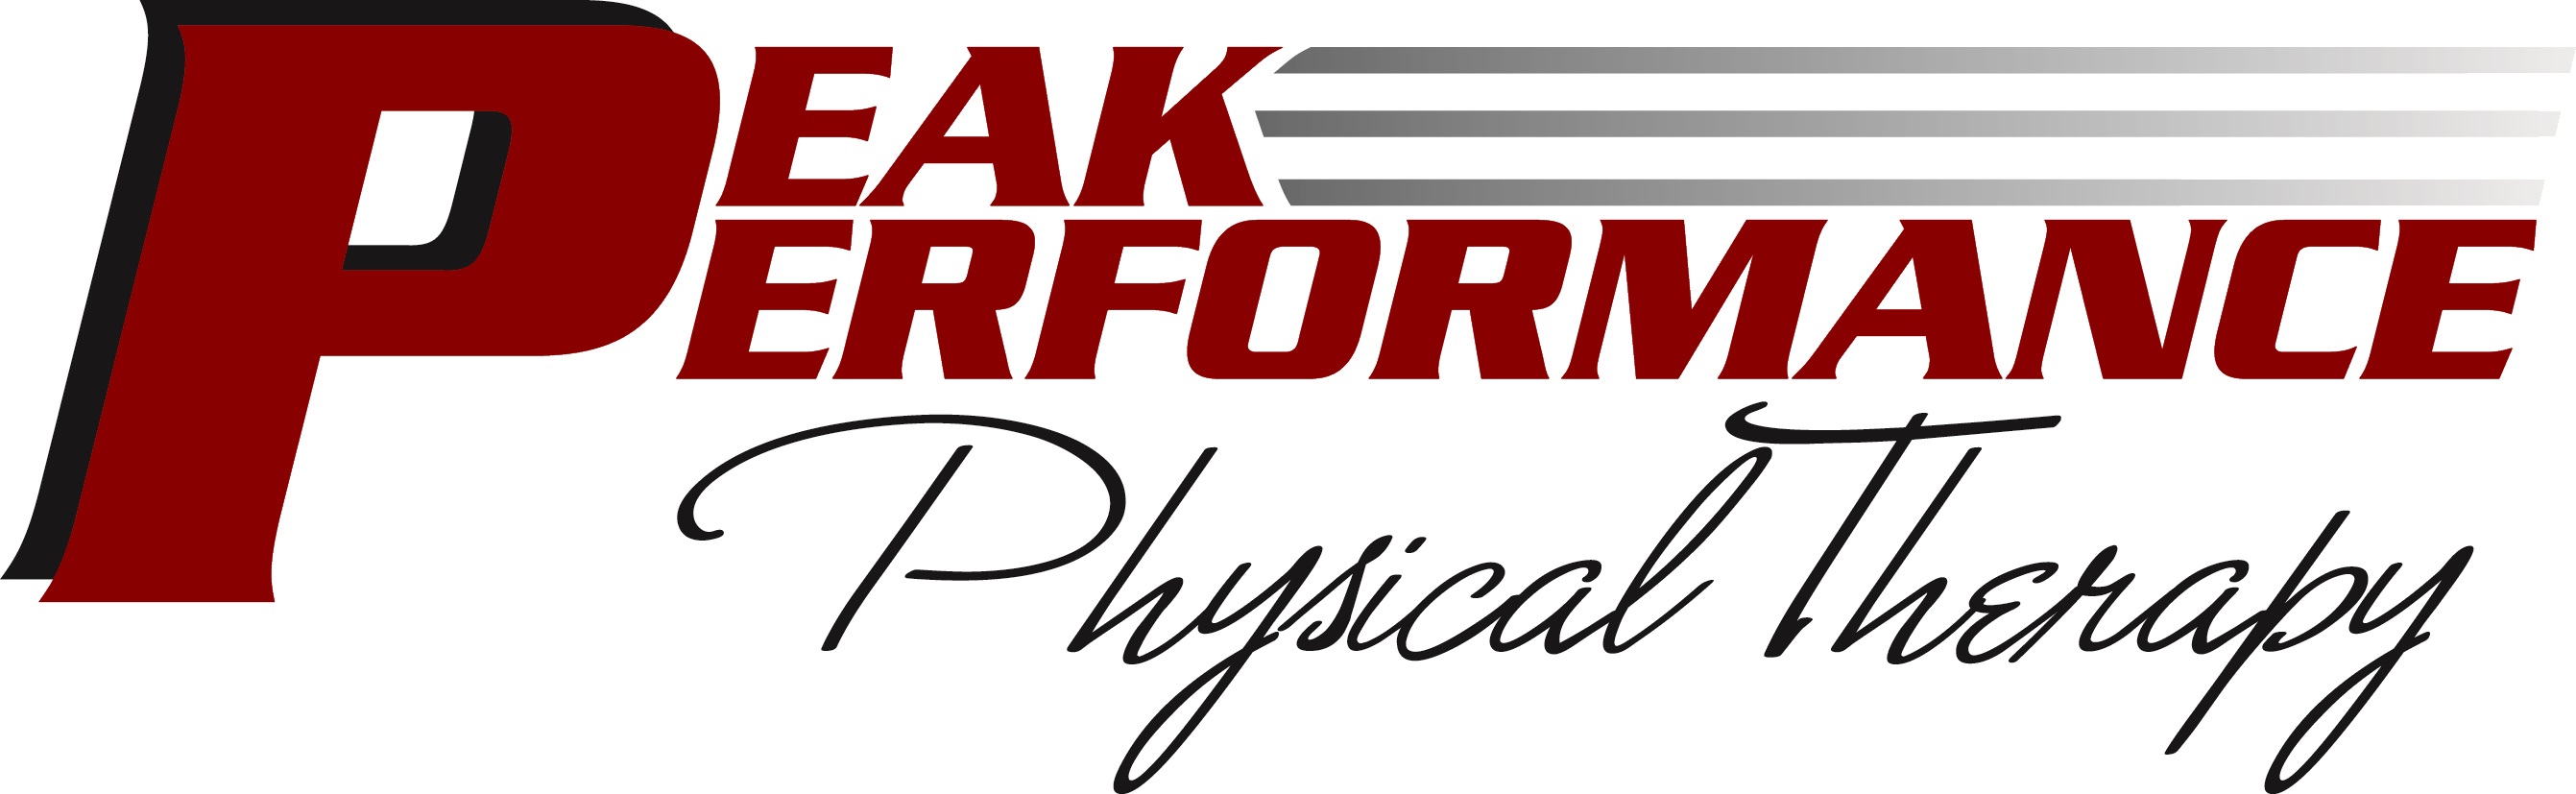 Peak Performance Physical Therapy